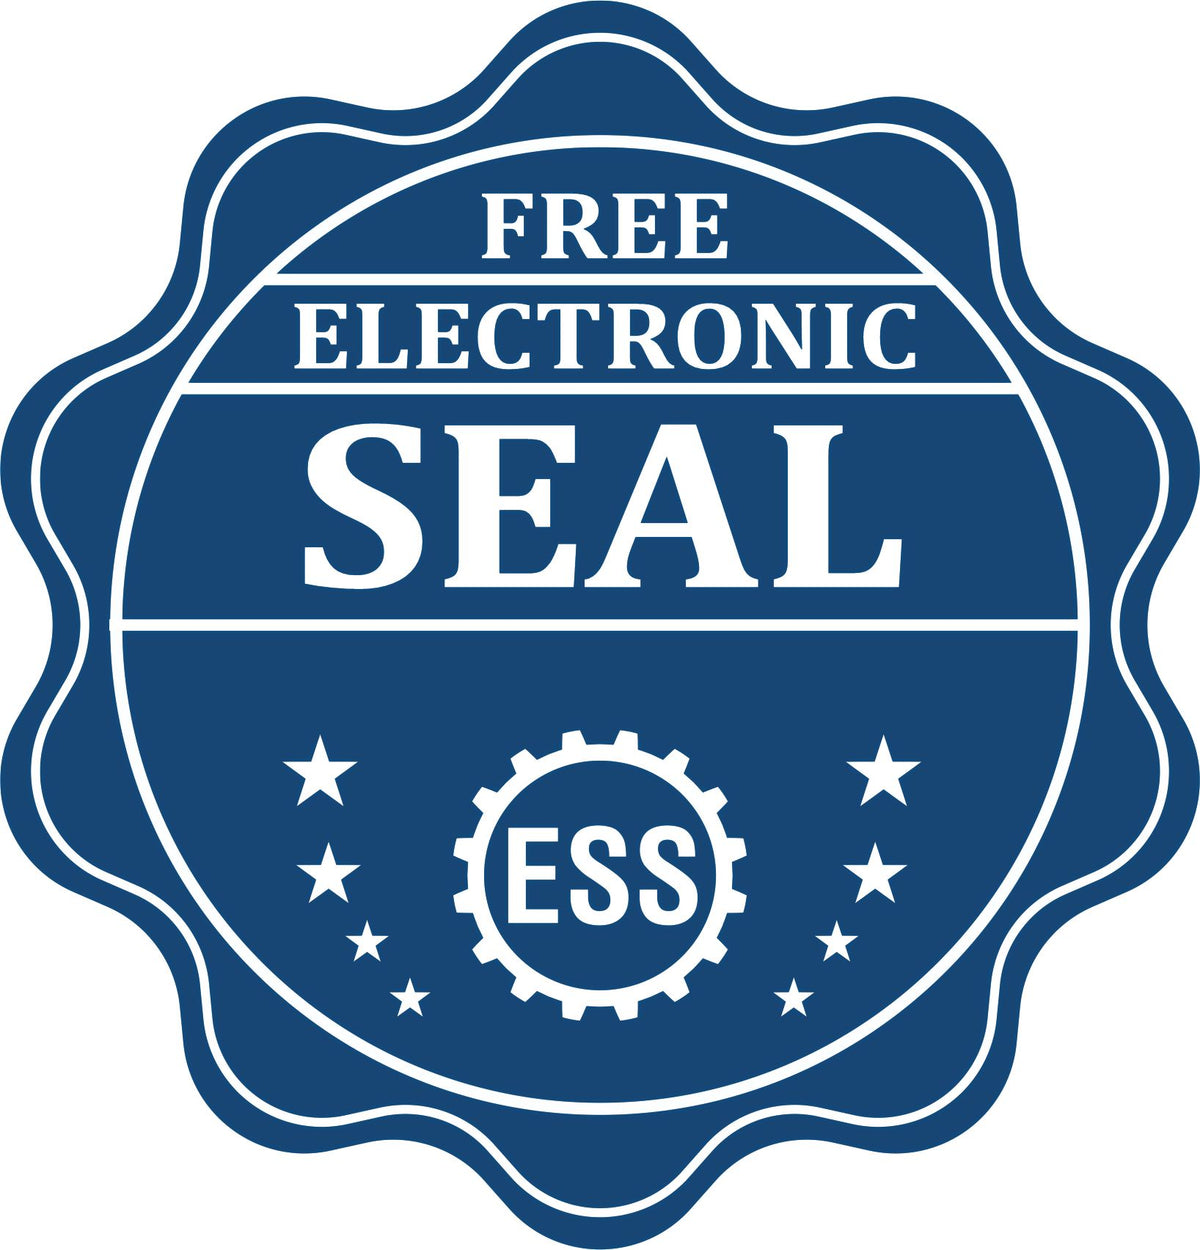 A badge showing a free electronic seal for the State of South Carolina Extended Long Reach Geologist Seal with stars and the ESS gear on the emblem.